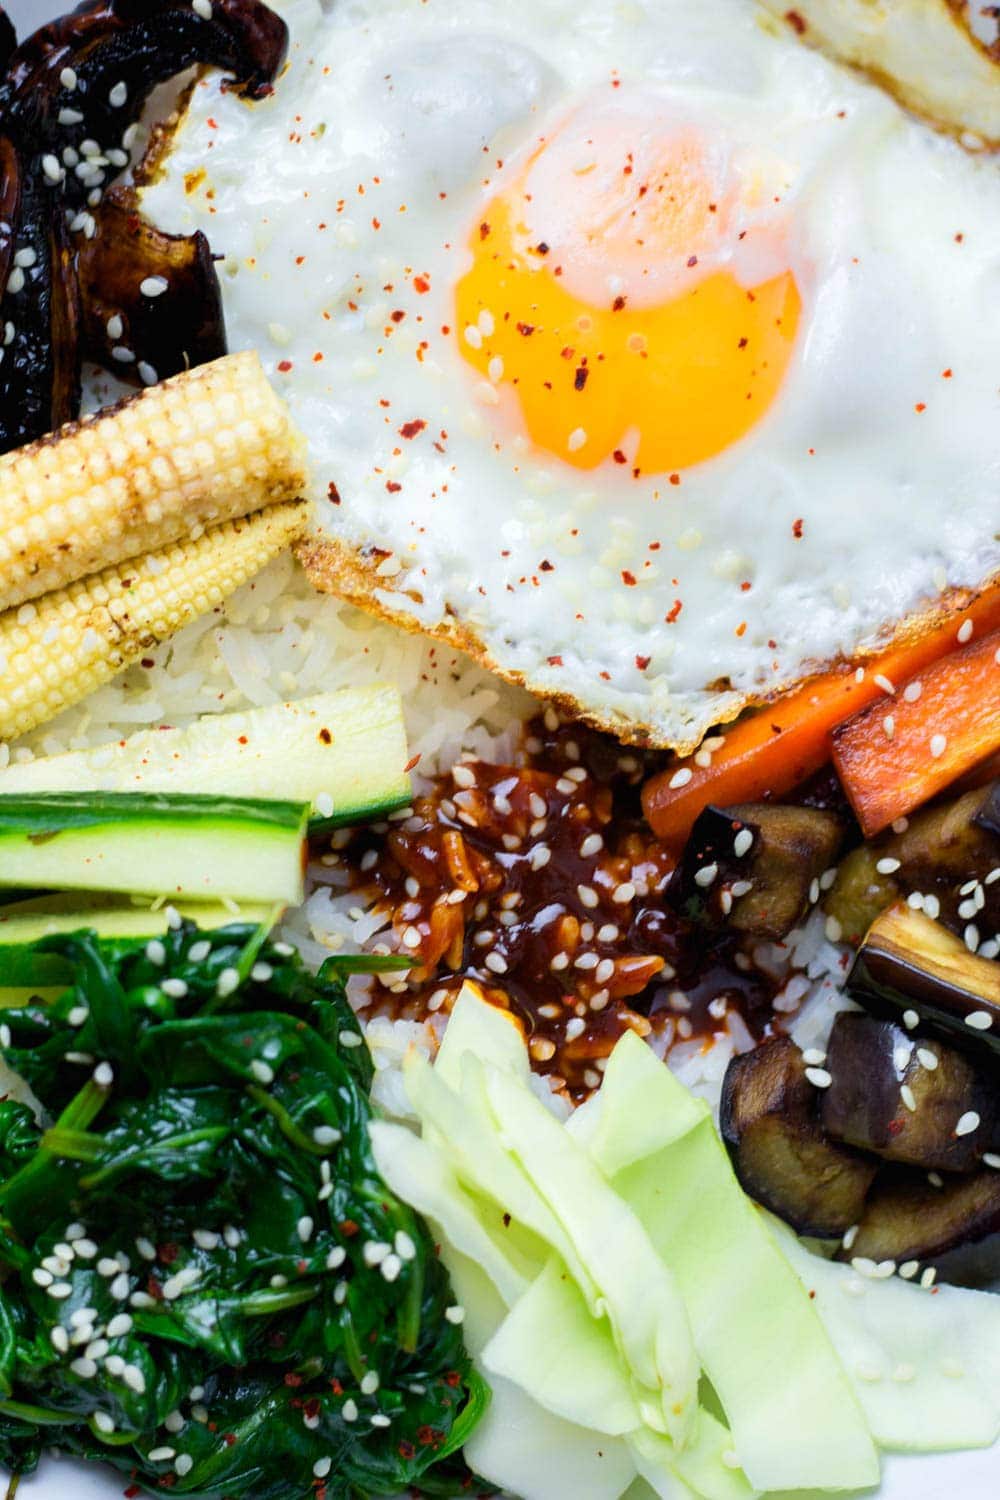 It's so easy to make this vegetable bibimbap and there's so many different ways you can make it your own! Don't forget the crispy fried egg & chilli sauce.